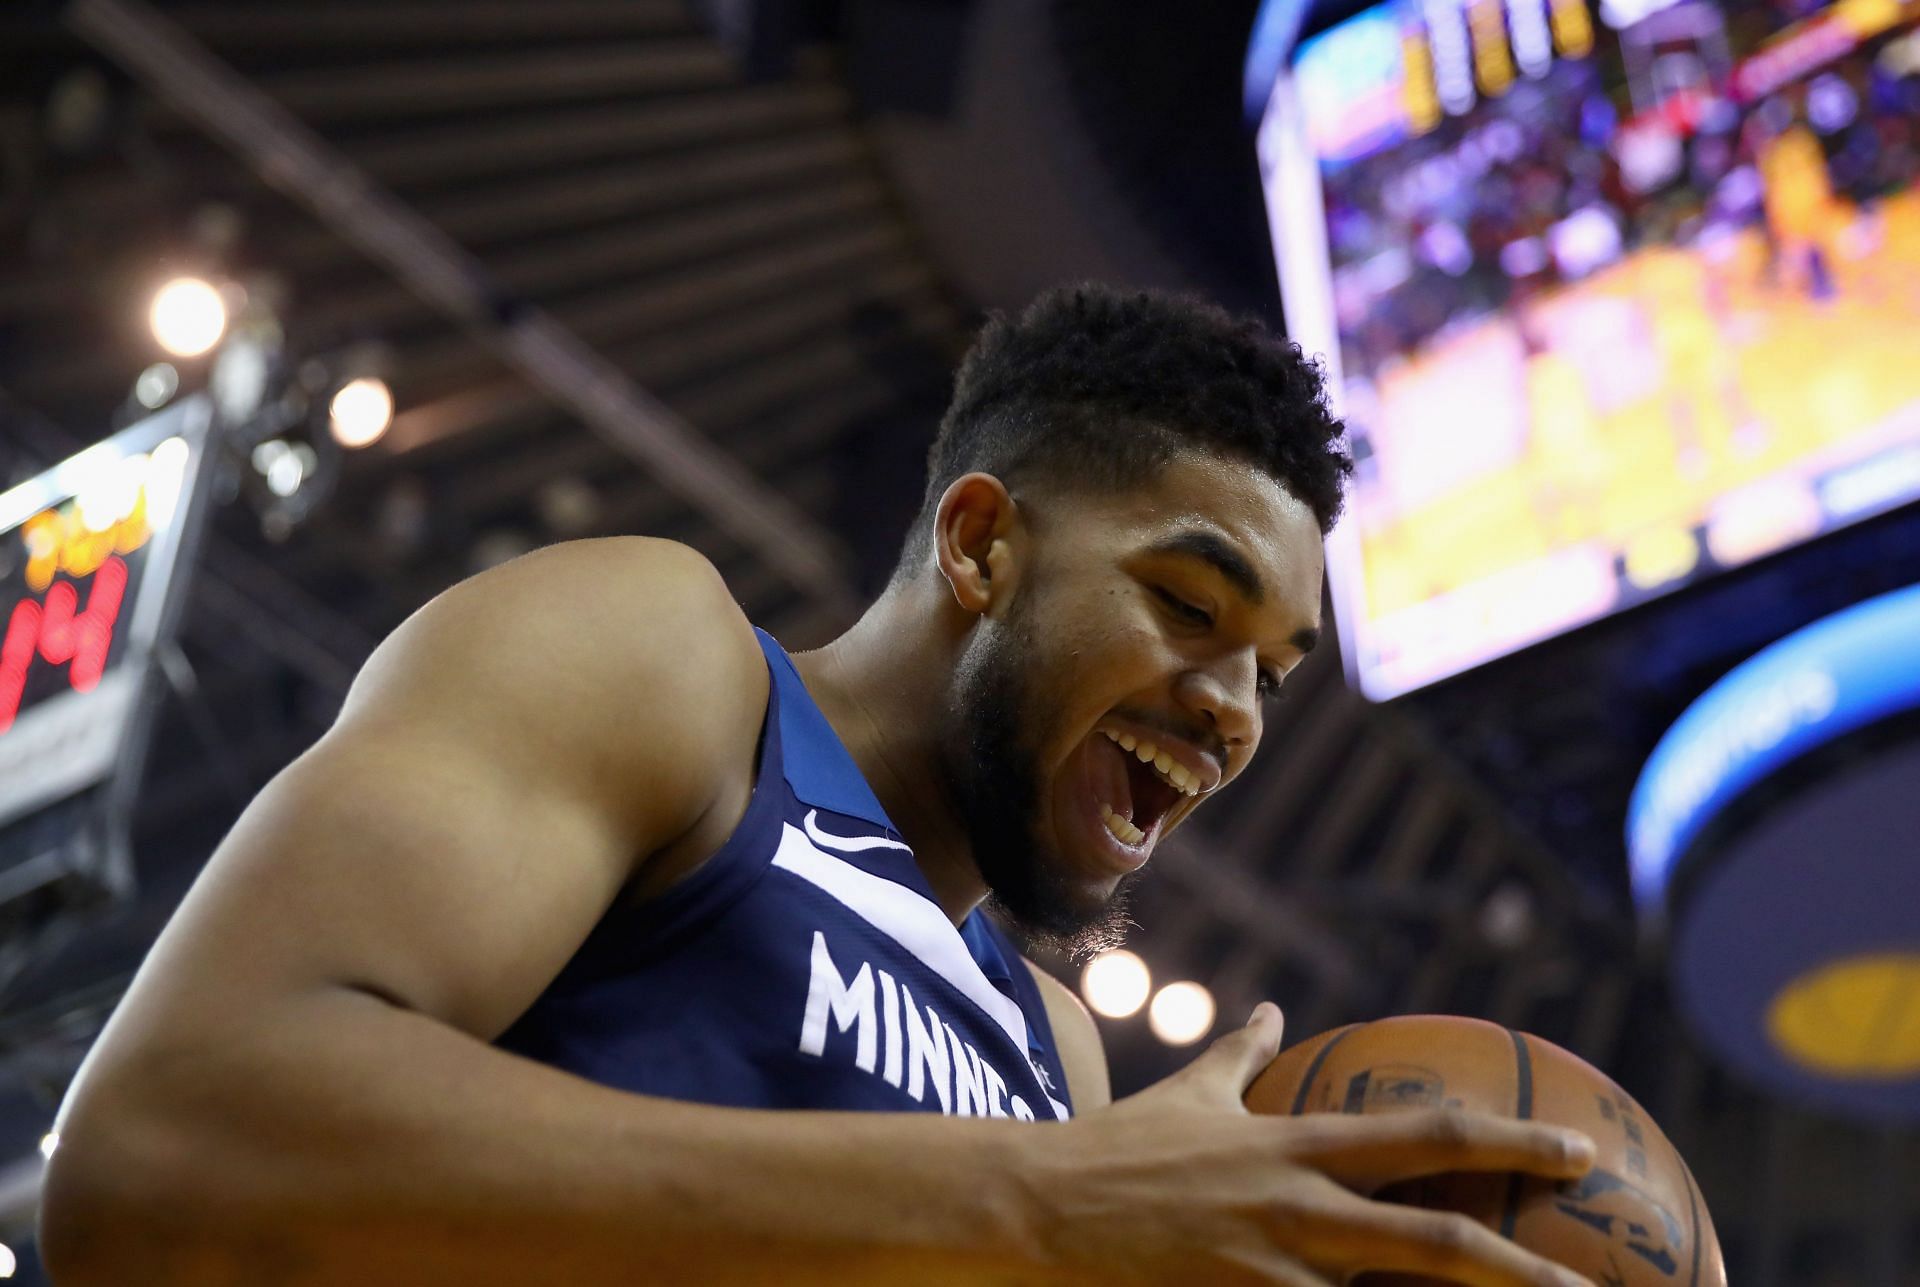 Karl-Anthony Towns #32 of the Minnesota Timberwolves in 2018.